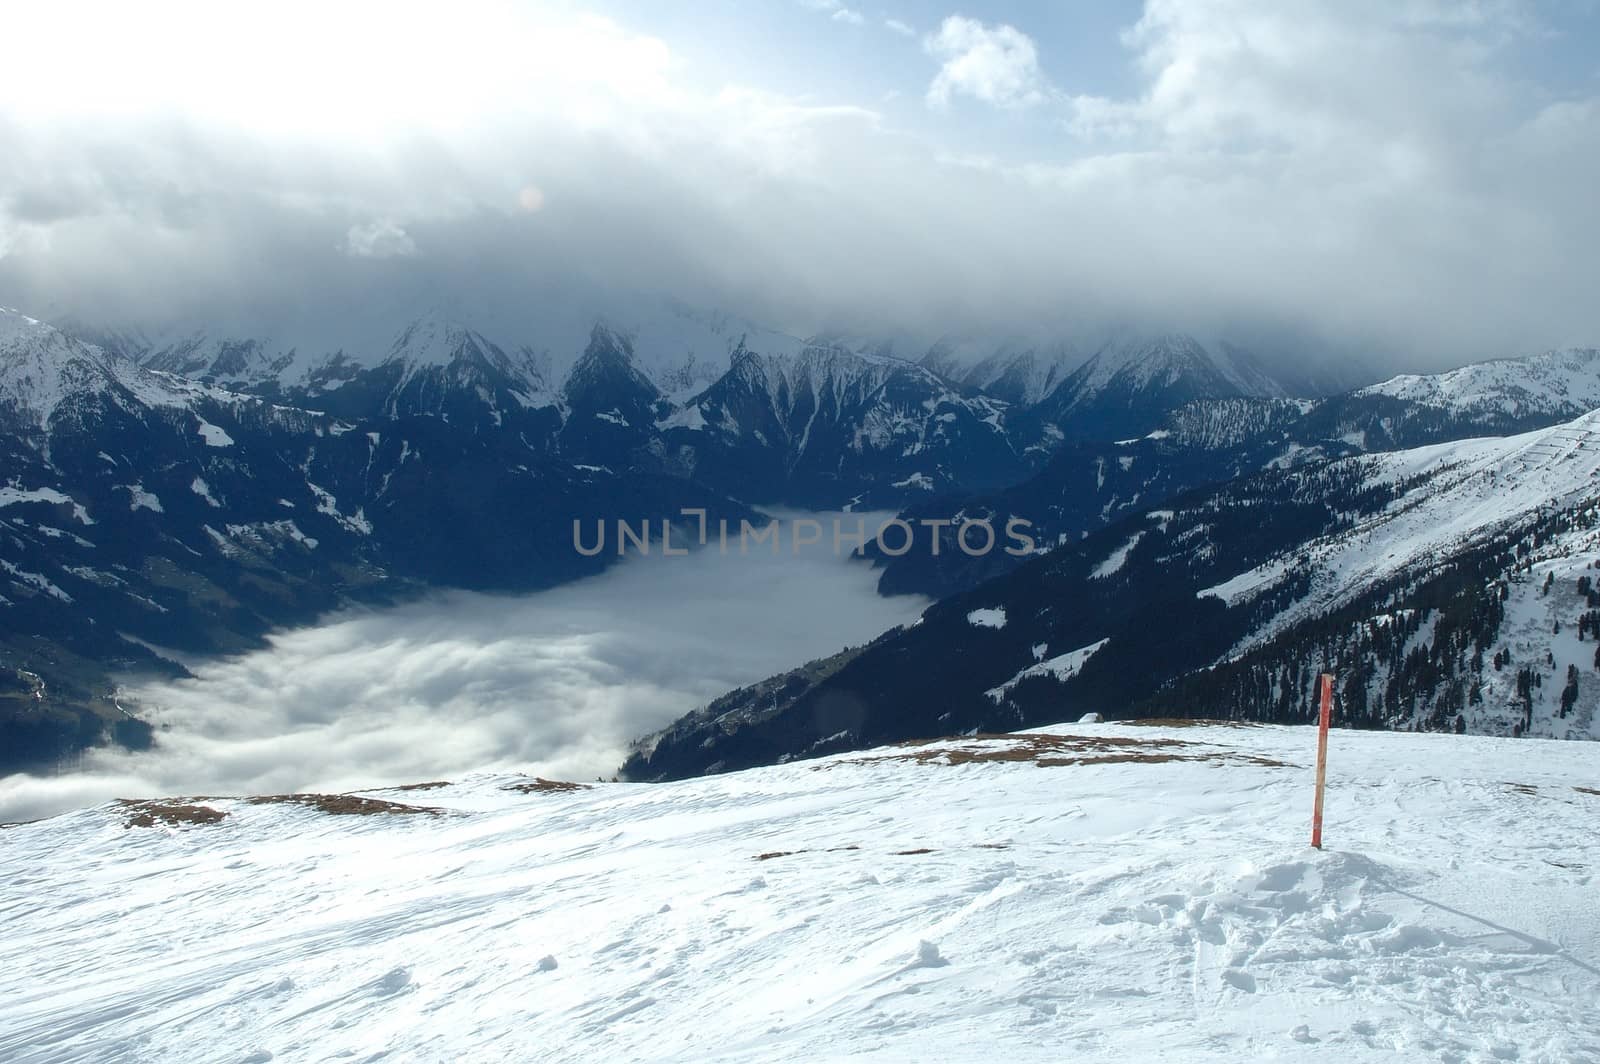 Zillertal valley covered with clouds view from Ofelerjoch peak in Austria nearby Kaltenbach